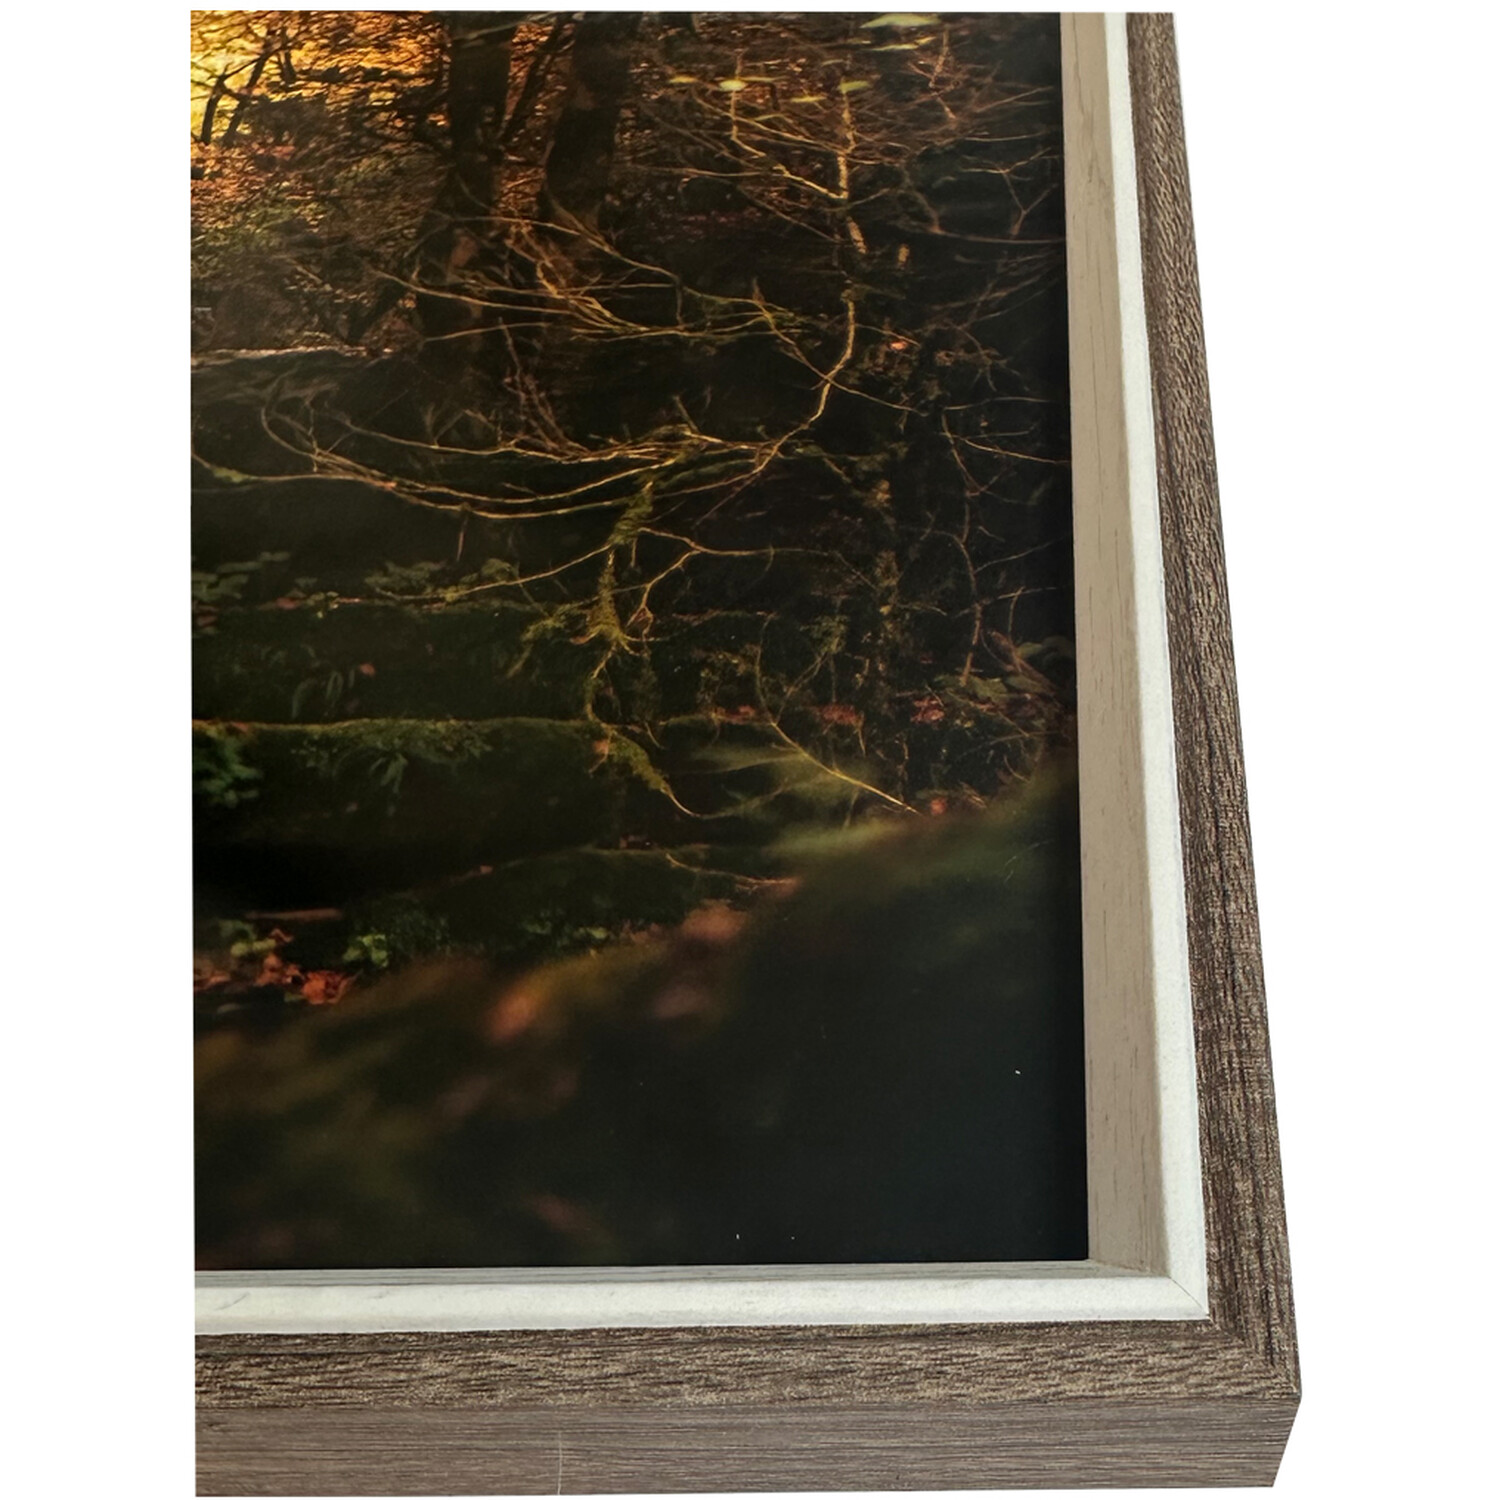 Zoey Rustic Wood Effect Frame - Brown / 16x12in Image 3